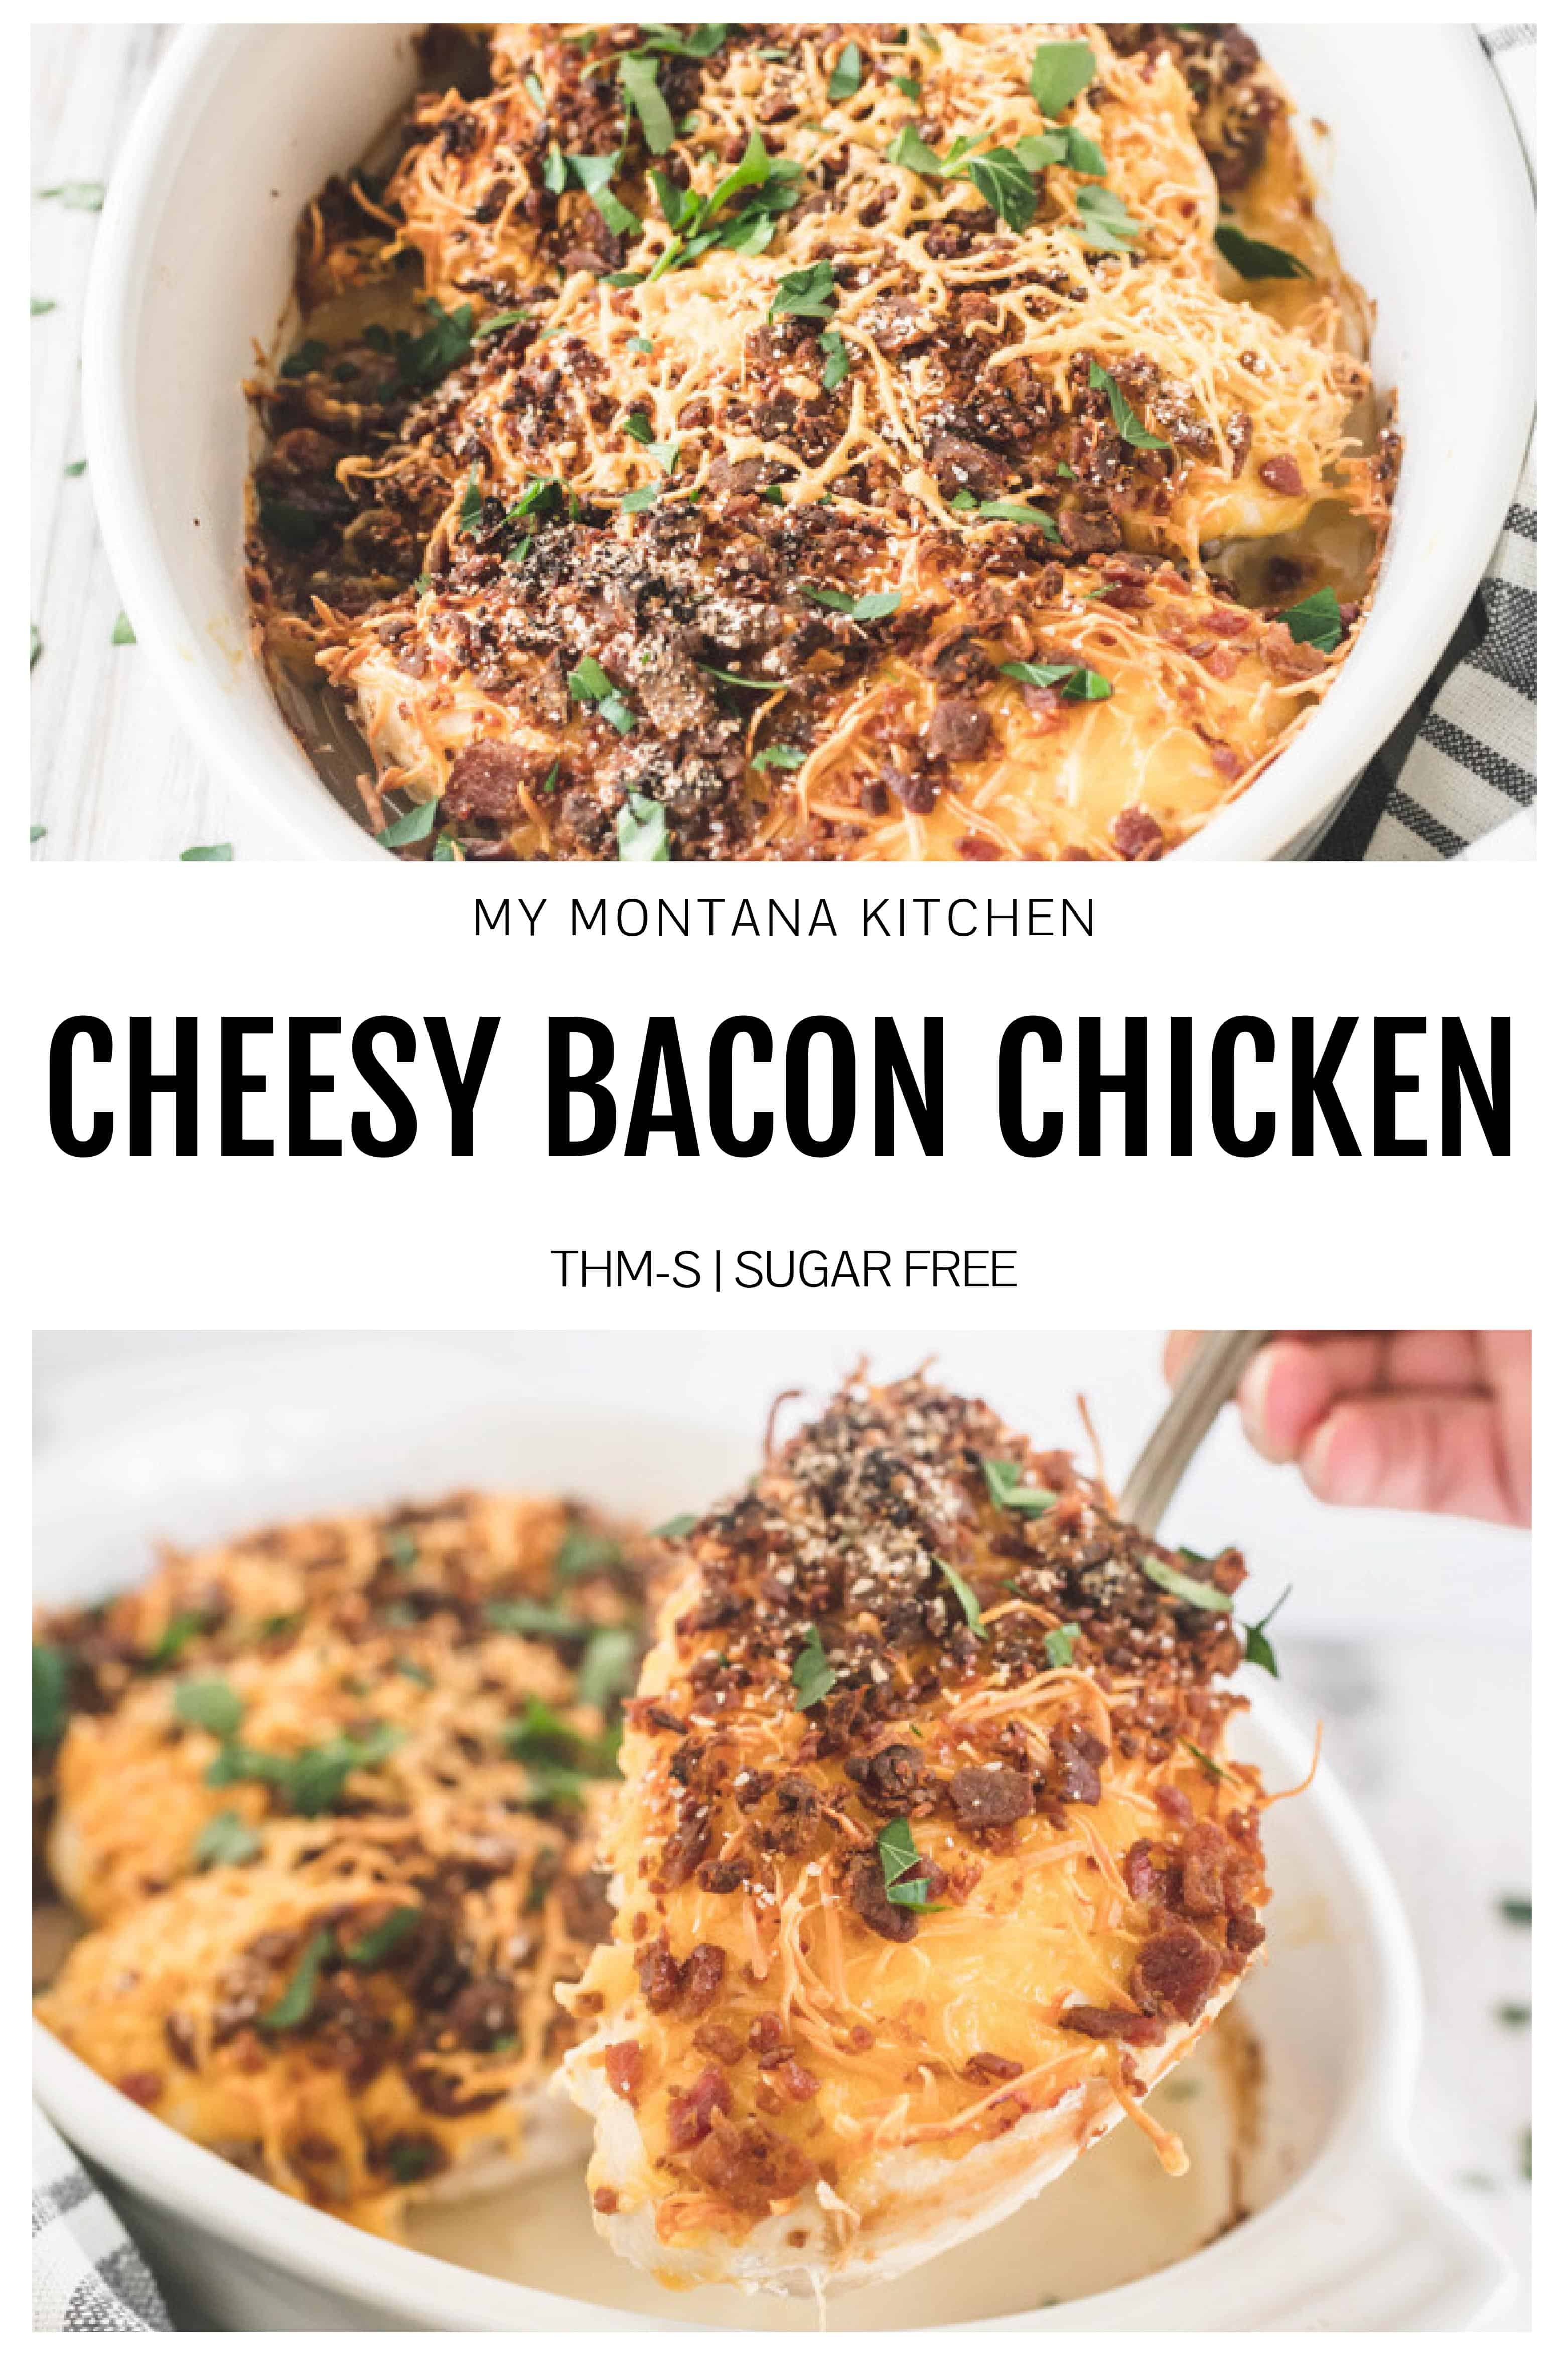 This easy chicken with bacon and cheese couldn’t be any easier! Juicy and tender chicken smothered in melty cheese and crispy bacon. This is a recipe that comes together in 5 minutes, and it makes a great weeknight dinner recipe! #cheesybaconchicken #lowcarbchickenrecipe